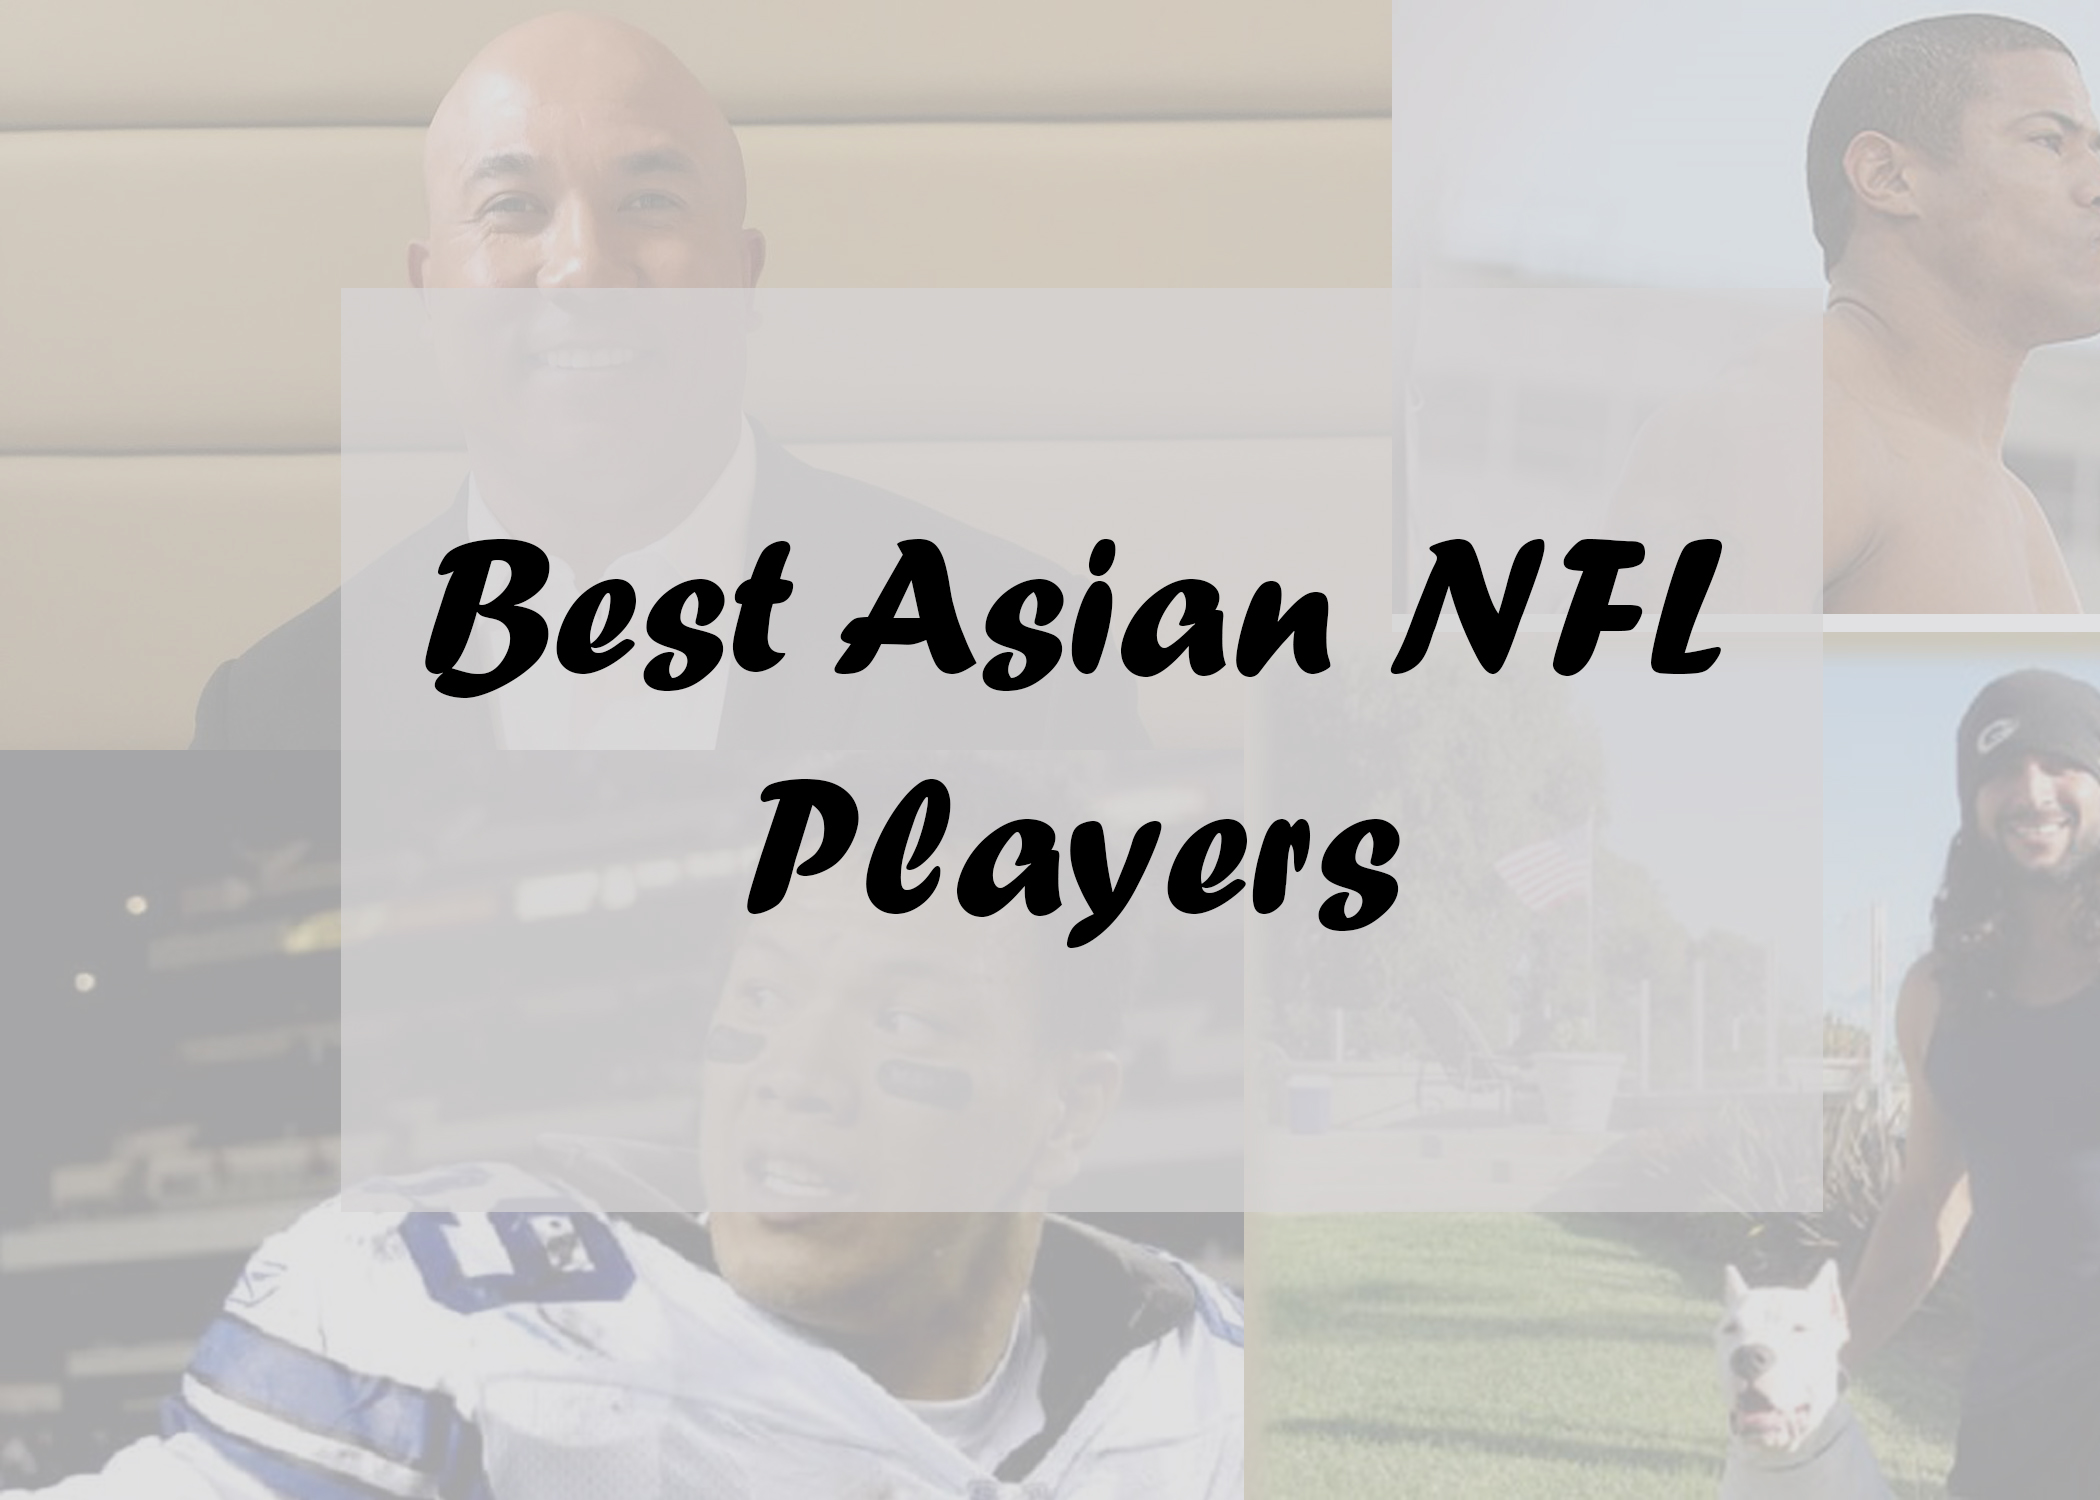 Best Asian NFL Players